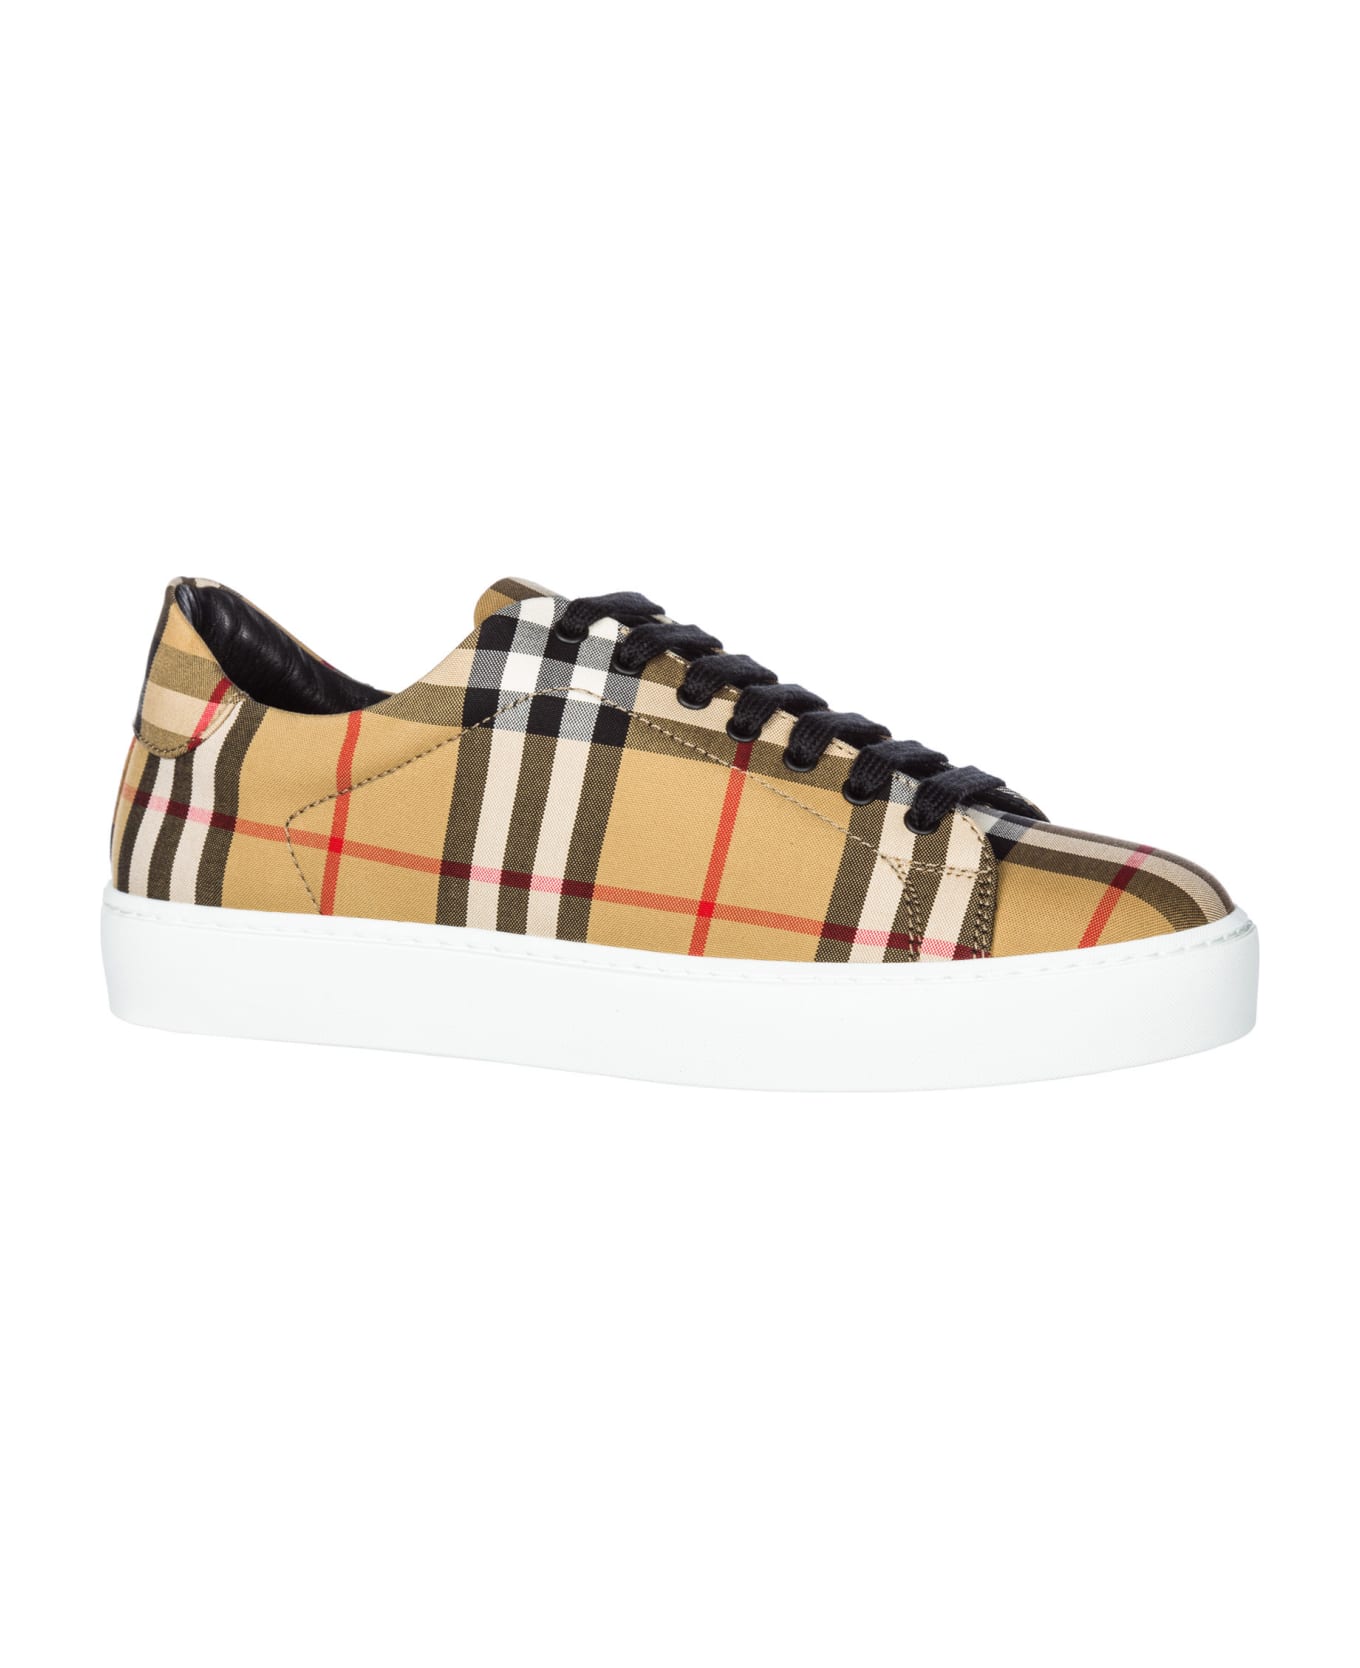 Burberry Shoes Trainers Sneakers Westford | italist, ALWAYS LIKE A SALE